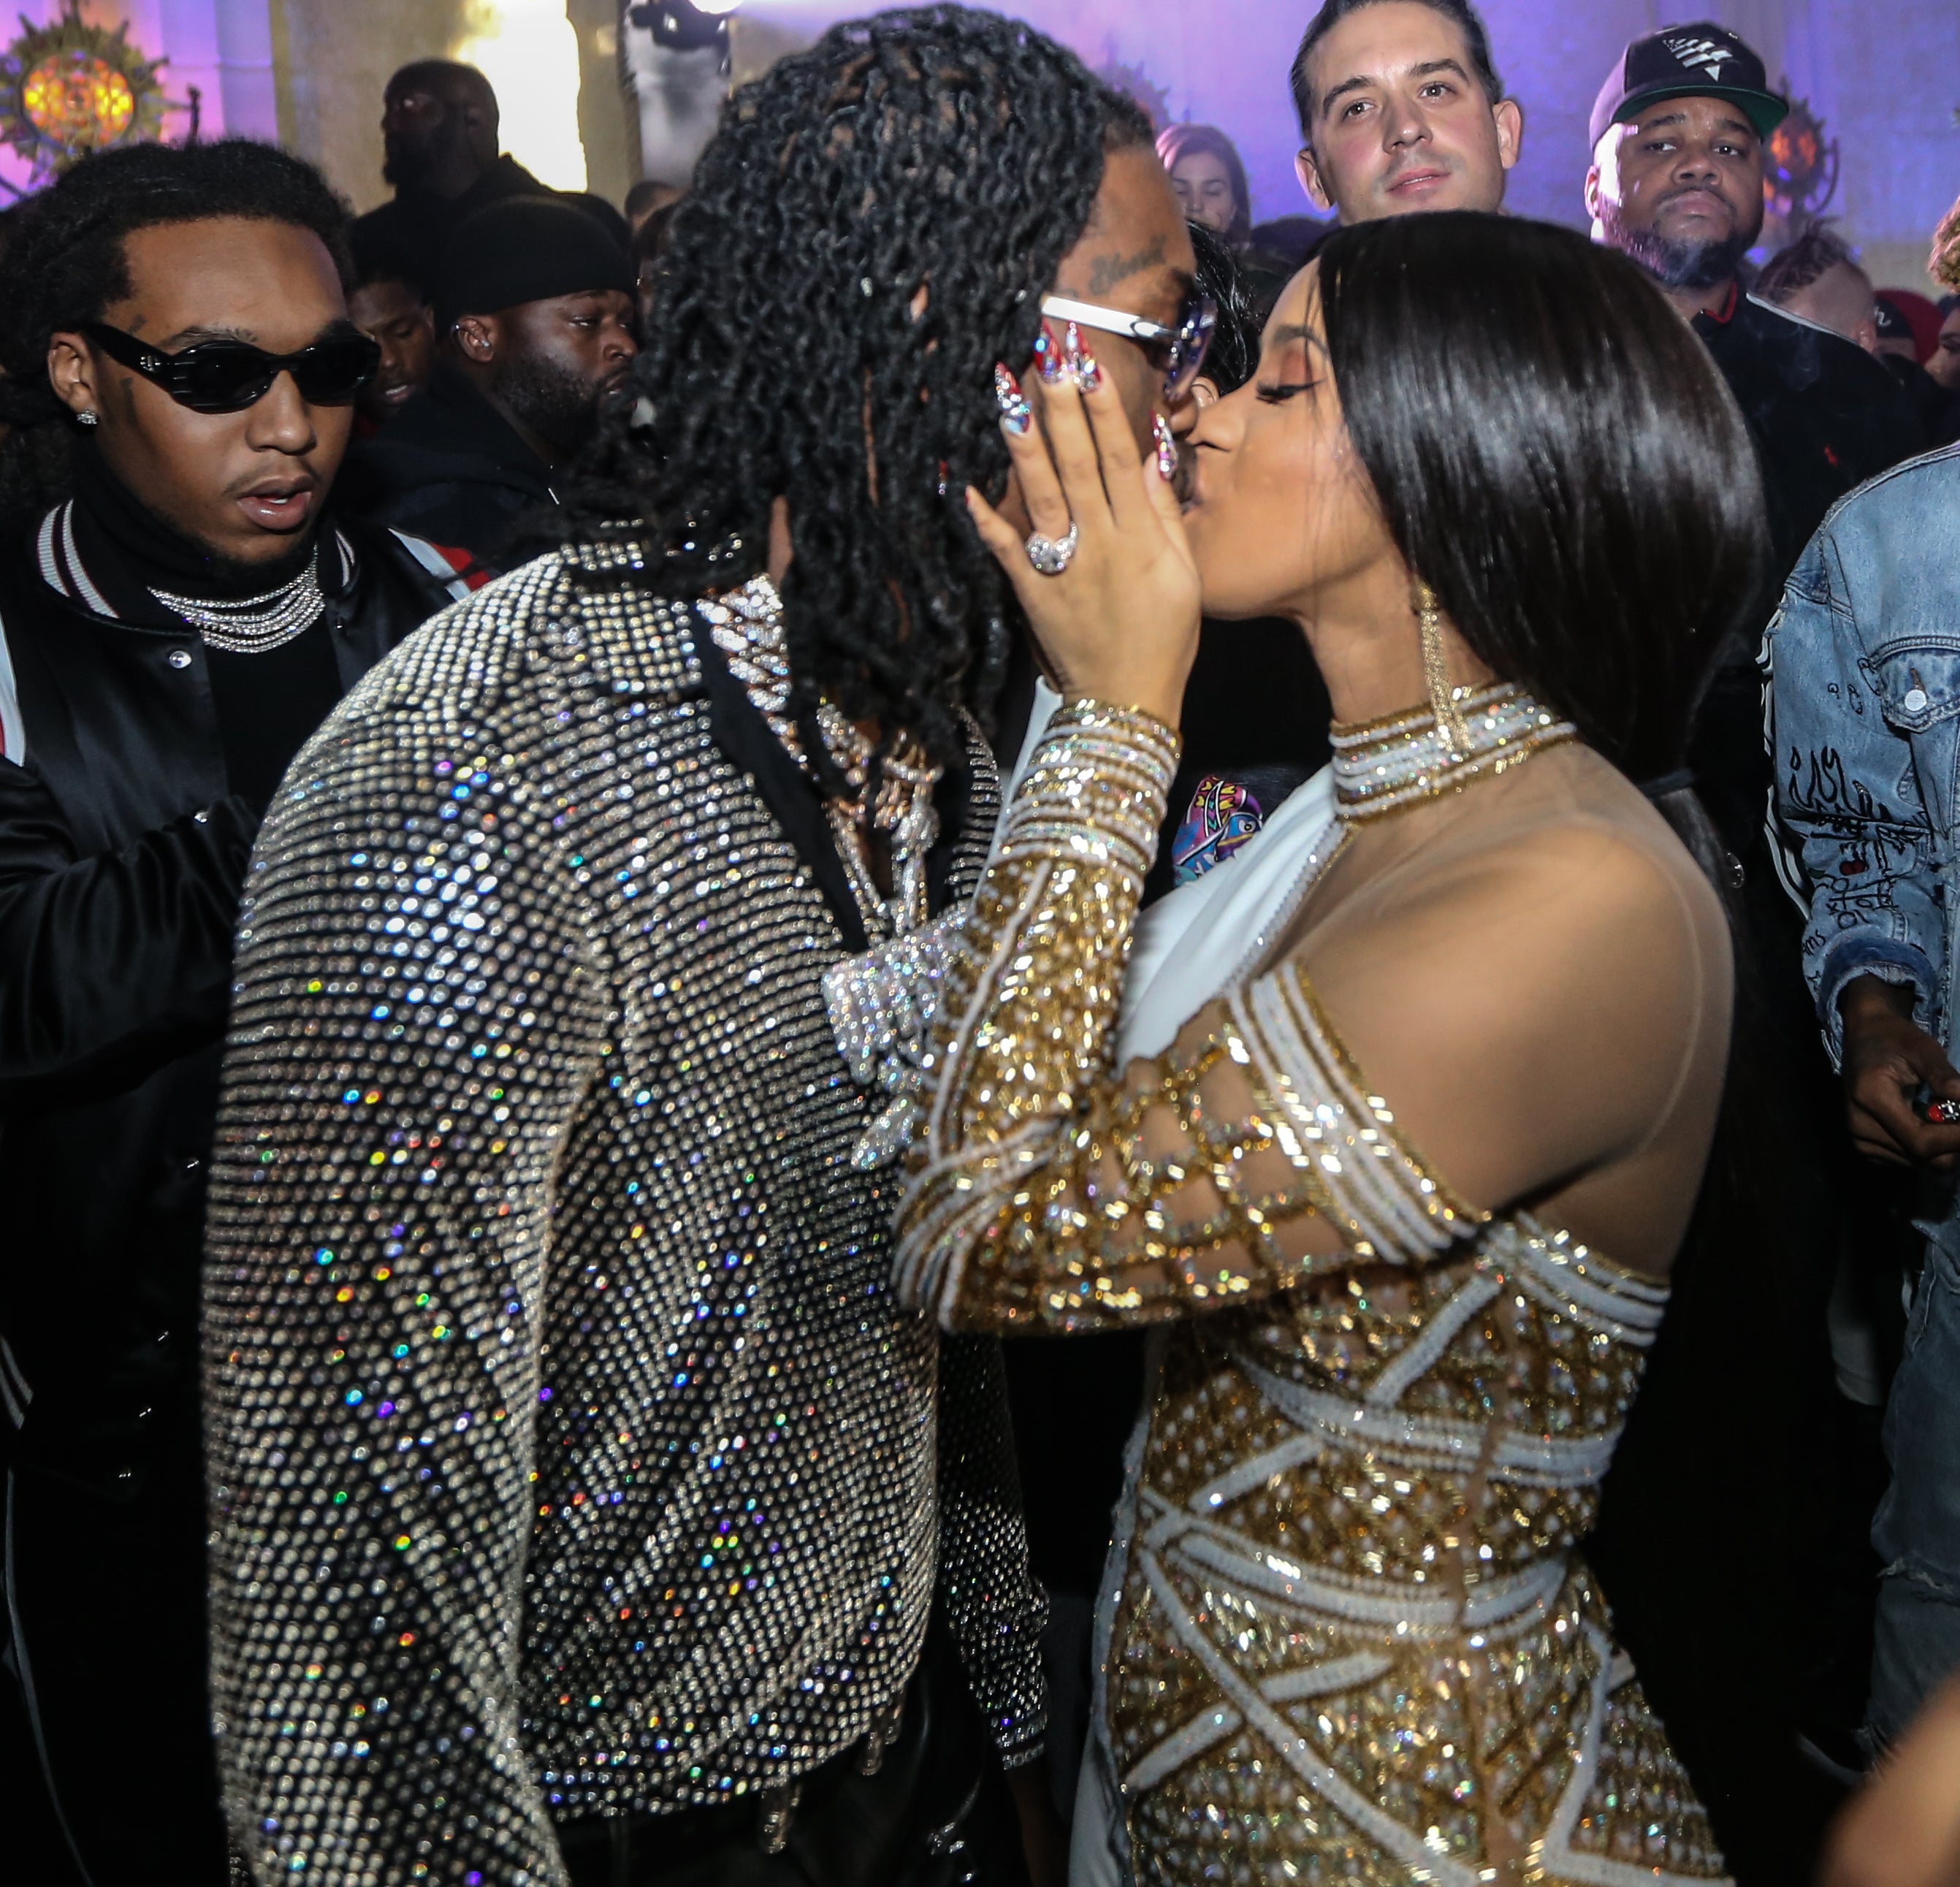 Offset Gives Cardi B a Lamborghini SUV As an Early Birthday Gift